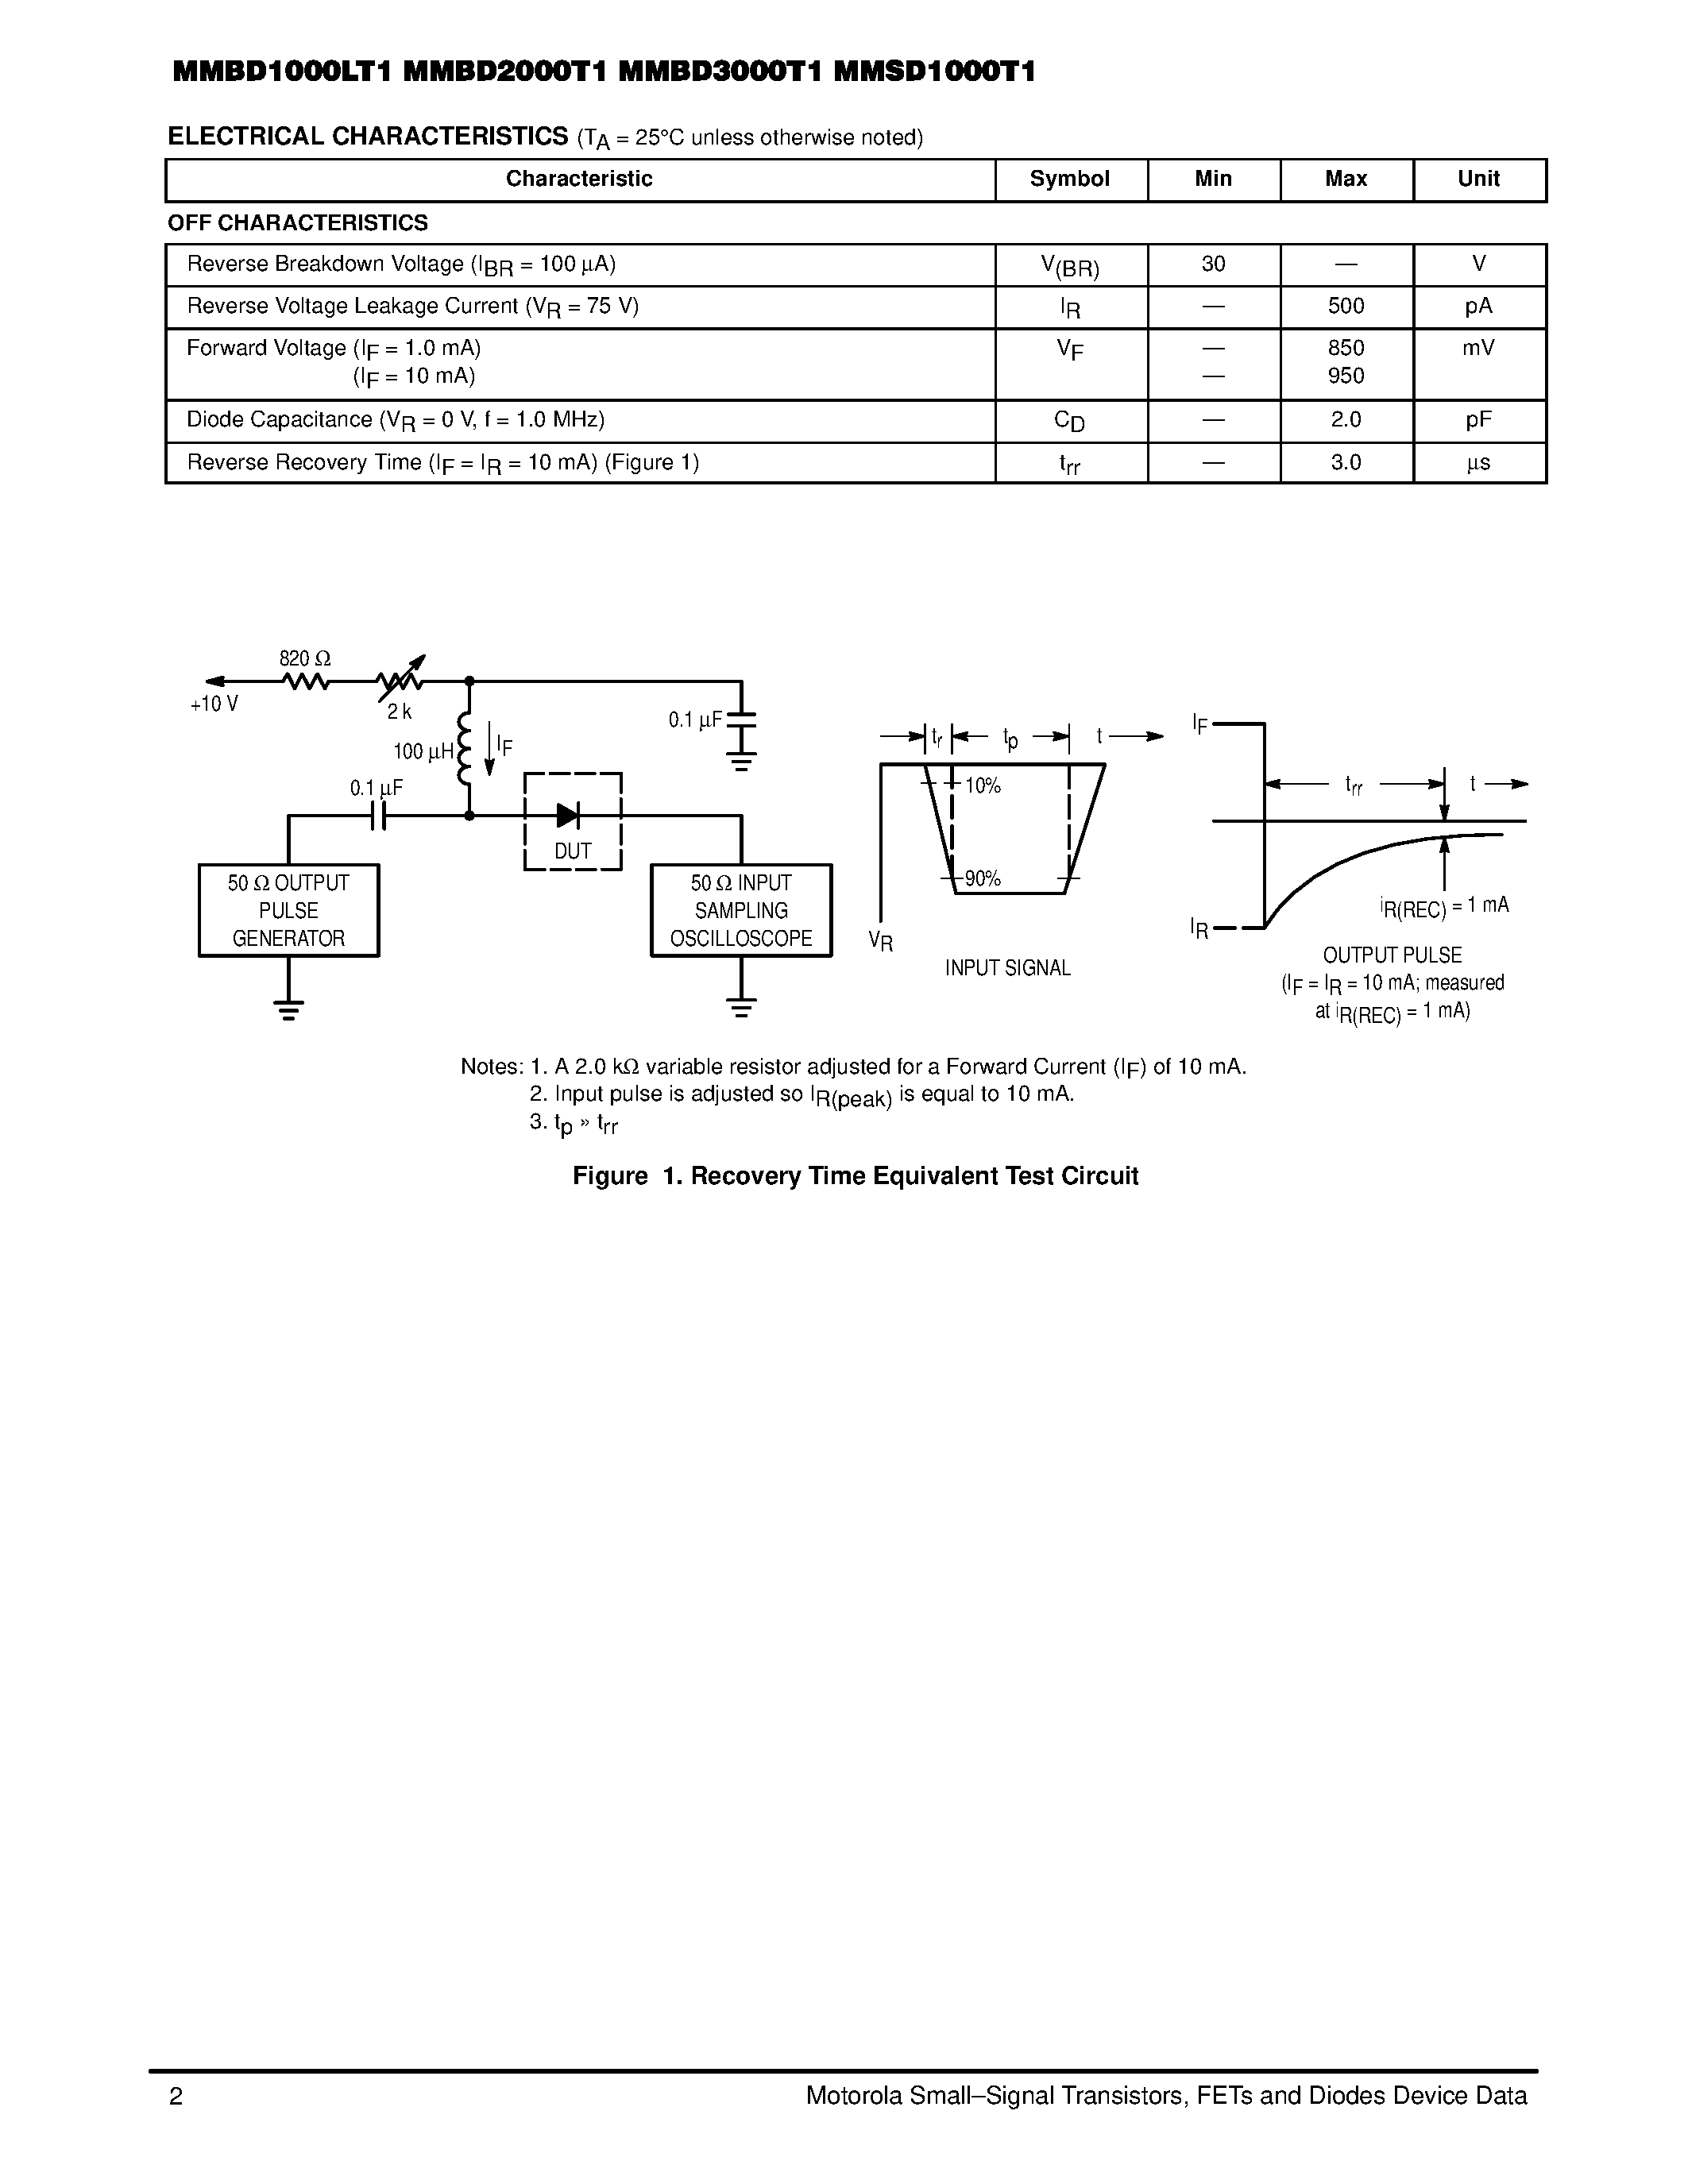 Datasheet MMBD1000LT1 - Switching Diode page 2